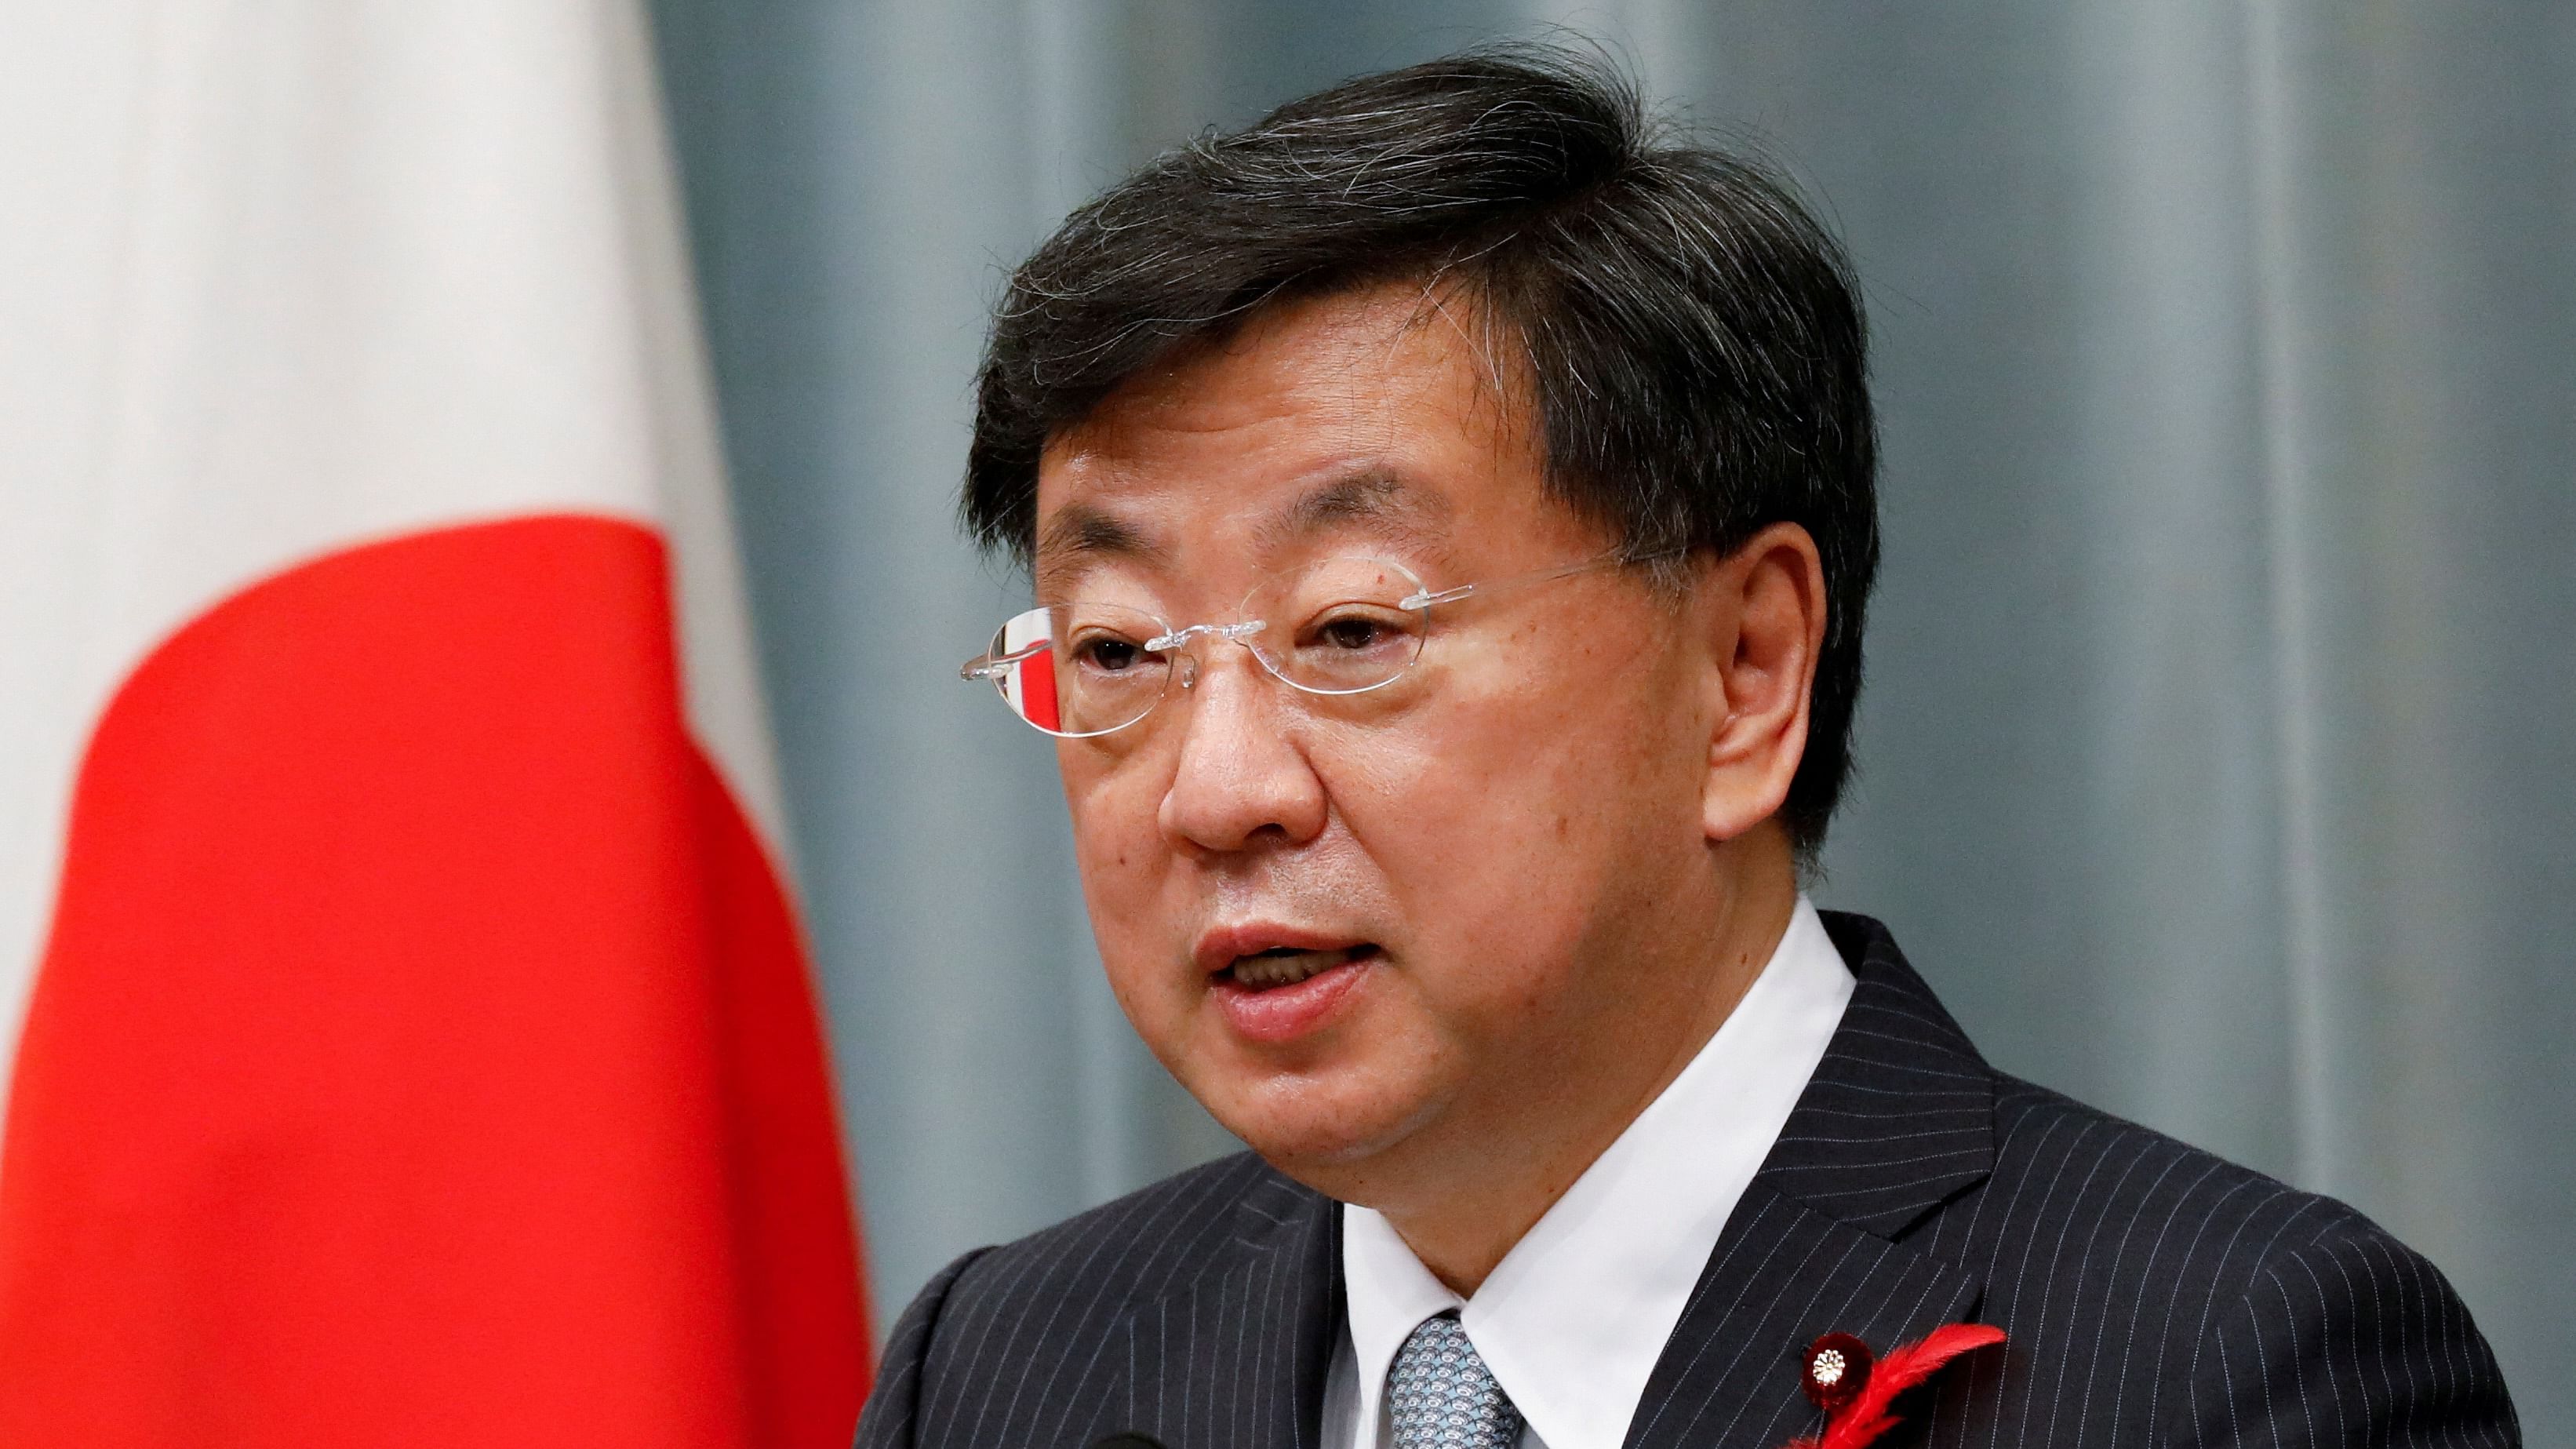 The Japanese diplomat based in the eastern city of Vladivostok was deemed "persona non grata over illegal intelligence activities", top government spokesman Hirokazu Matsuno told reporters. Credit: Reuters Photo